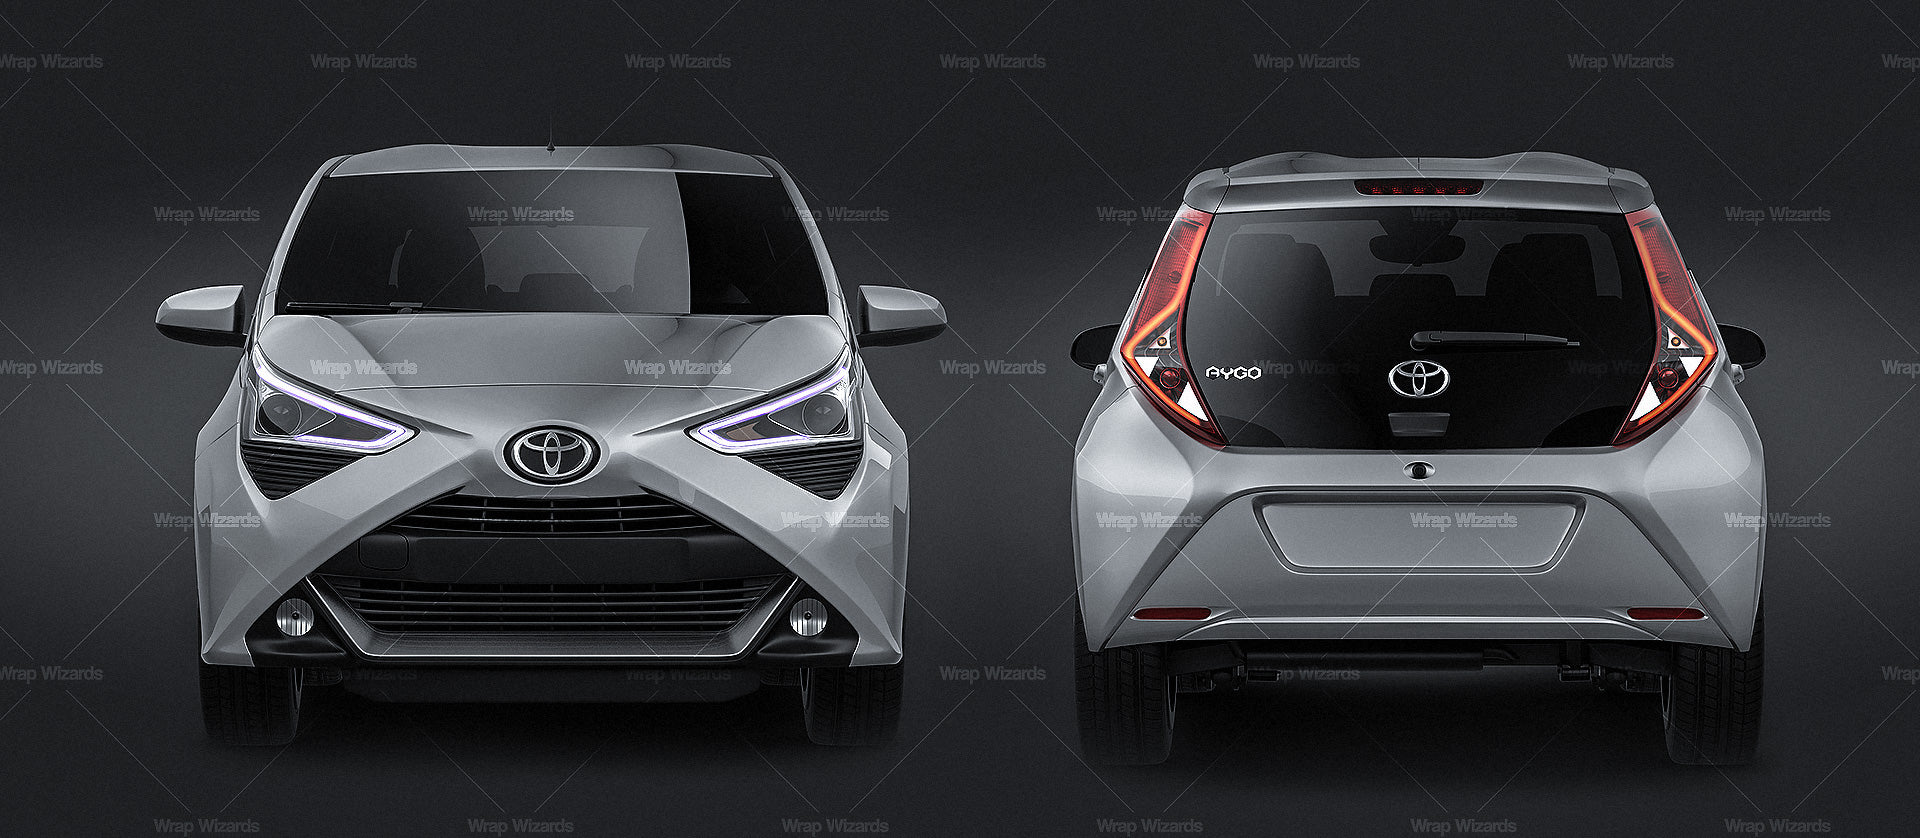 Toyota Aygo 2019 glossy finish - all sides Car Mockup Template.psd